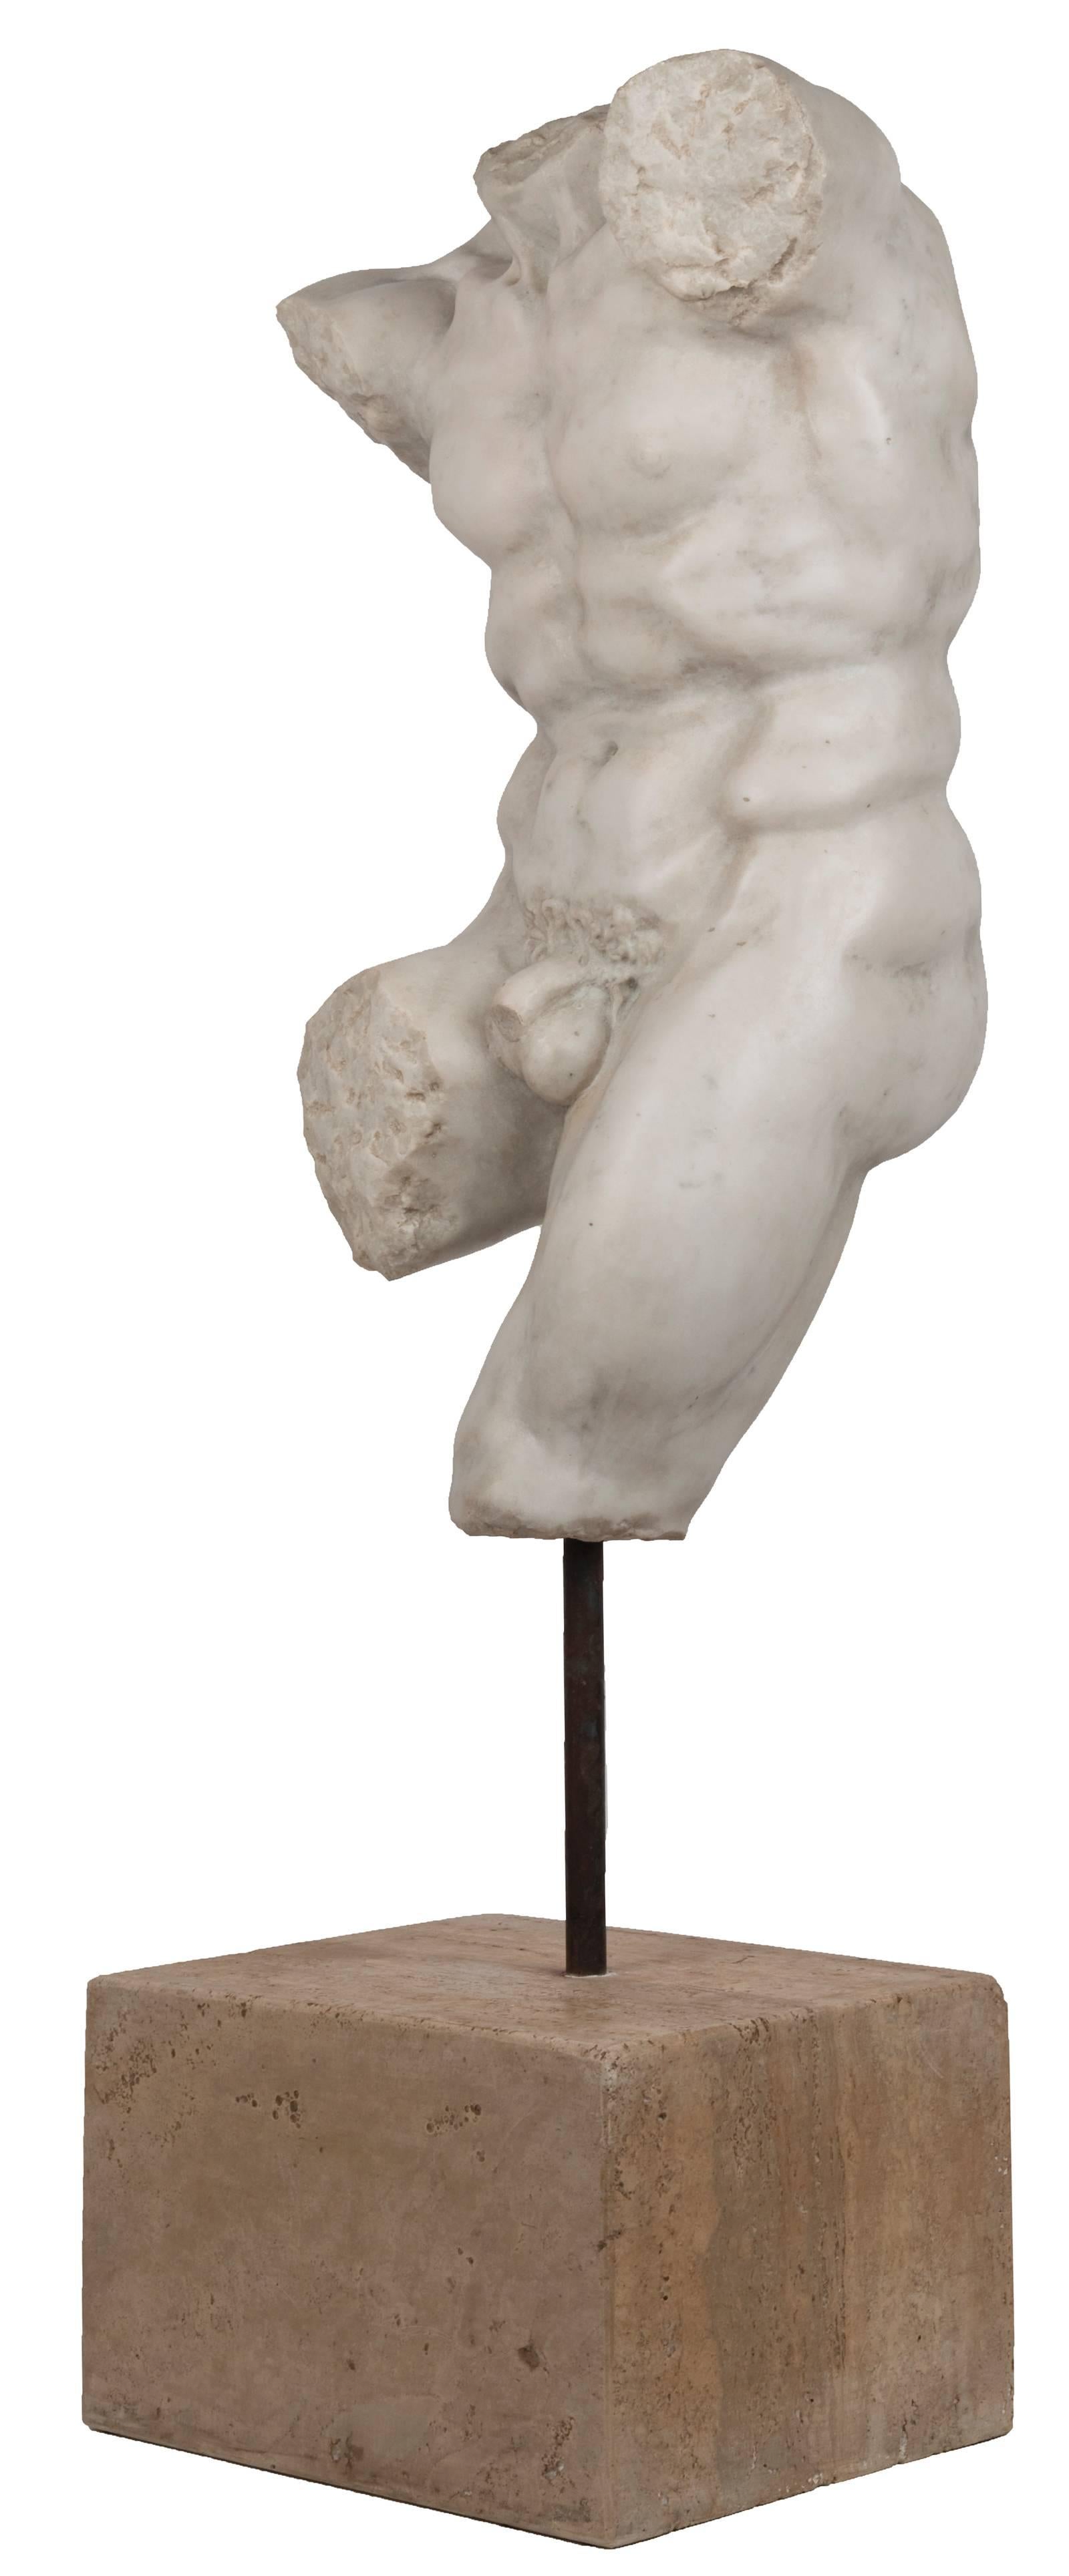 A beautifully carved white marble torso of a man on a marble stand. Though the fragment lacks the head and most of the arms and legs, the well-formed piece maintains the strength and sense of movement, arms outstretched and leg raised, of the